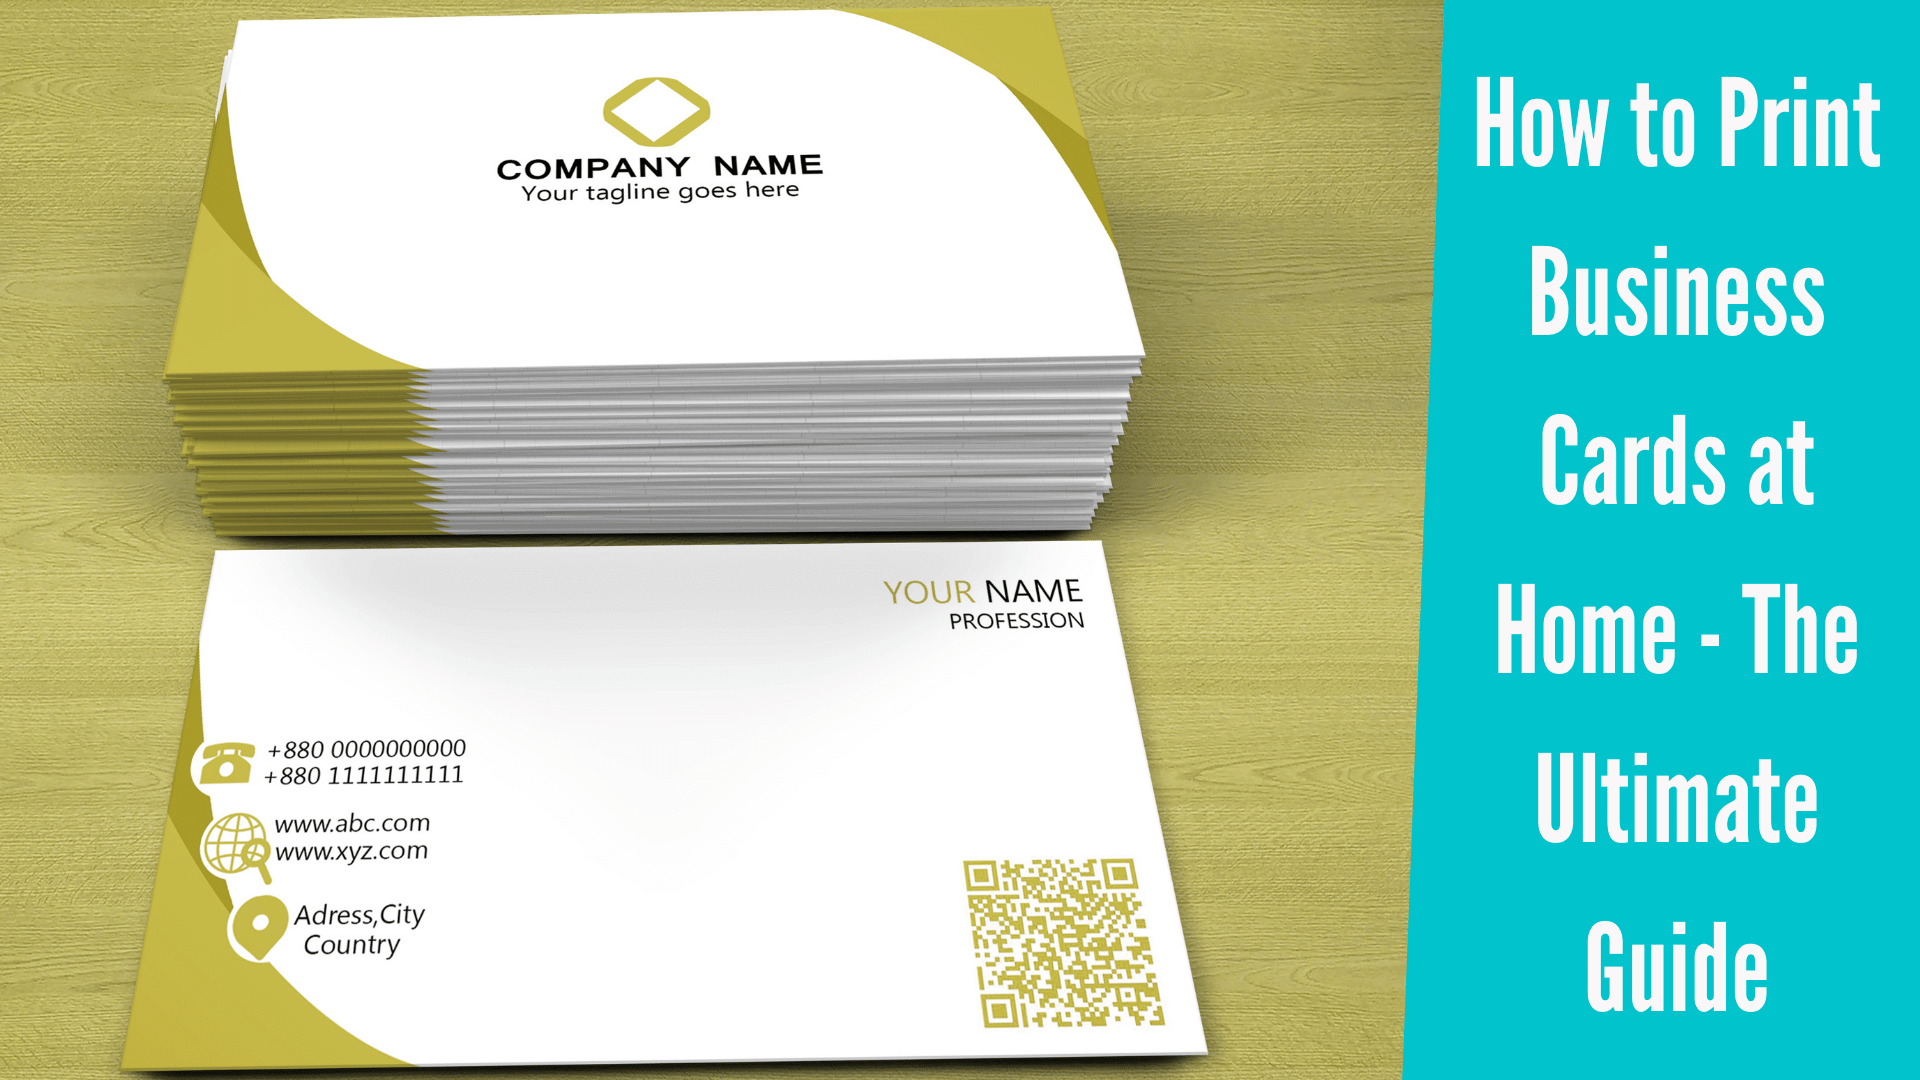 How to Print Business Cards at Home: The Ultimate Guide